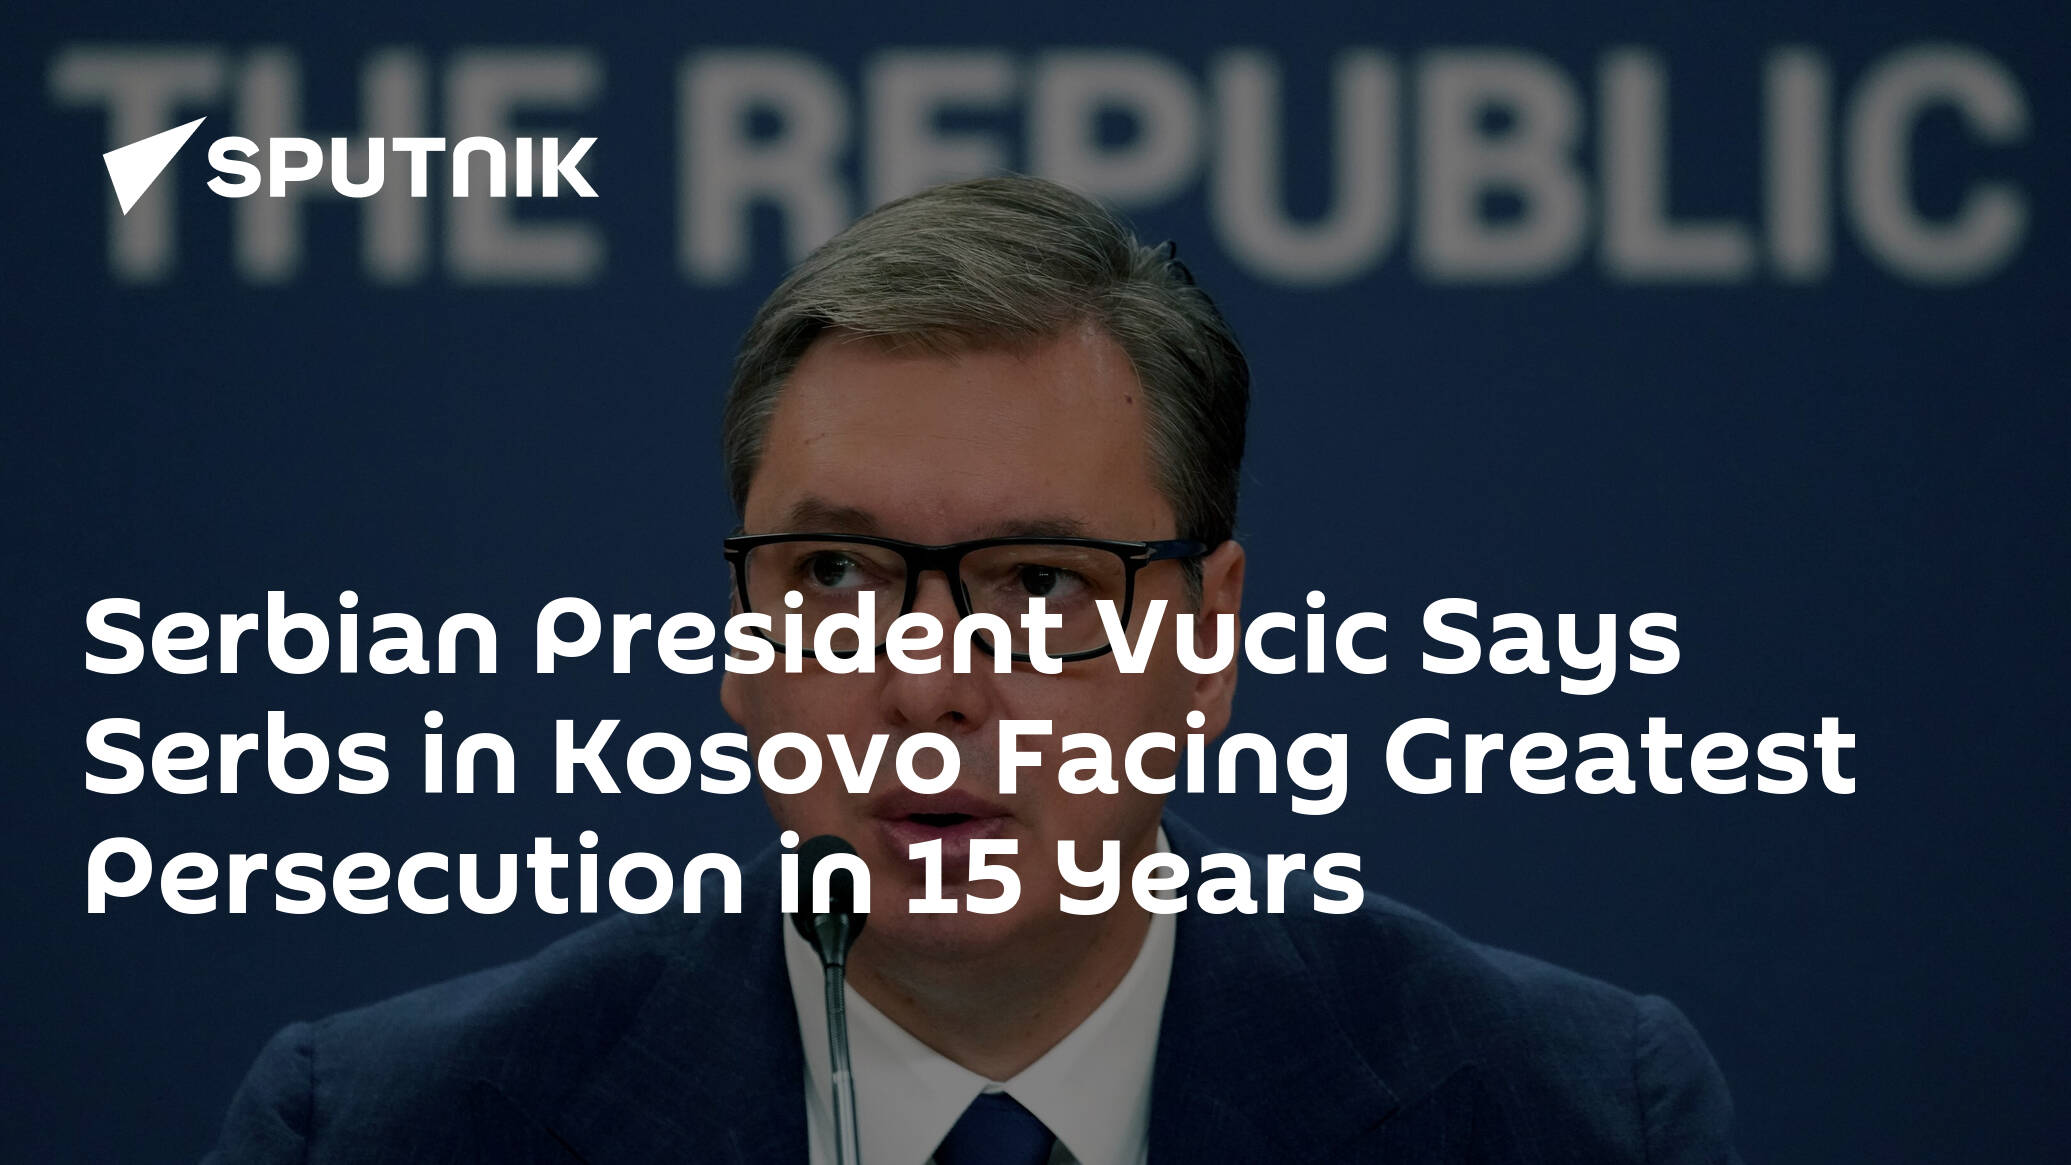 Serbian President Vucic Says Serbs in Kosovo Facing Greatest Persecution in 15 Years